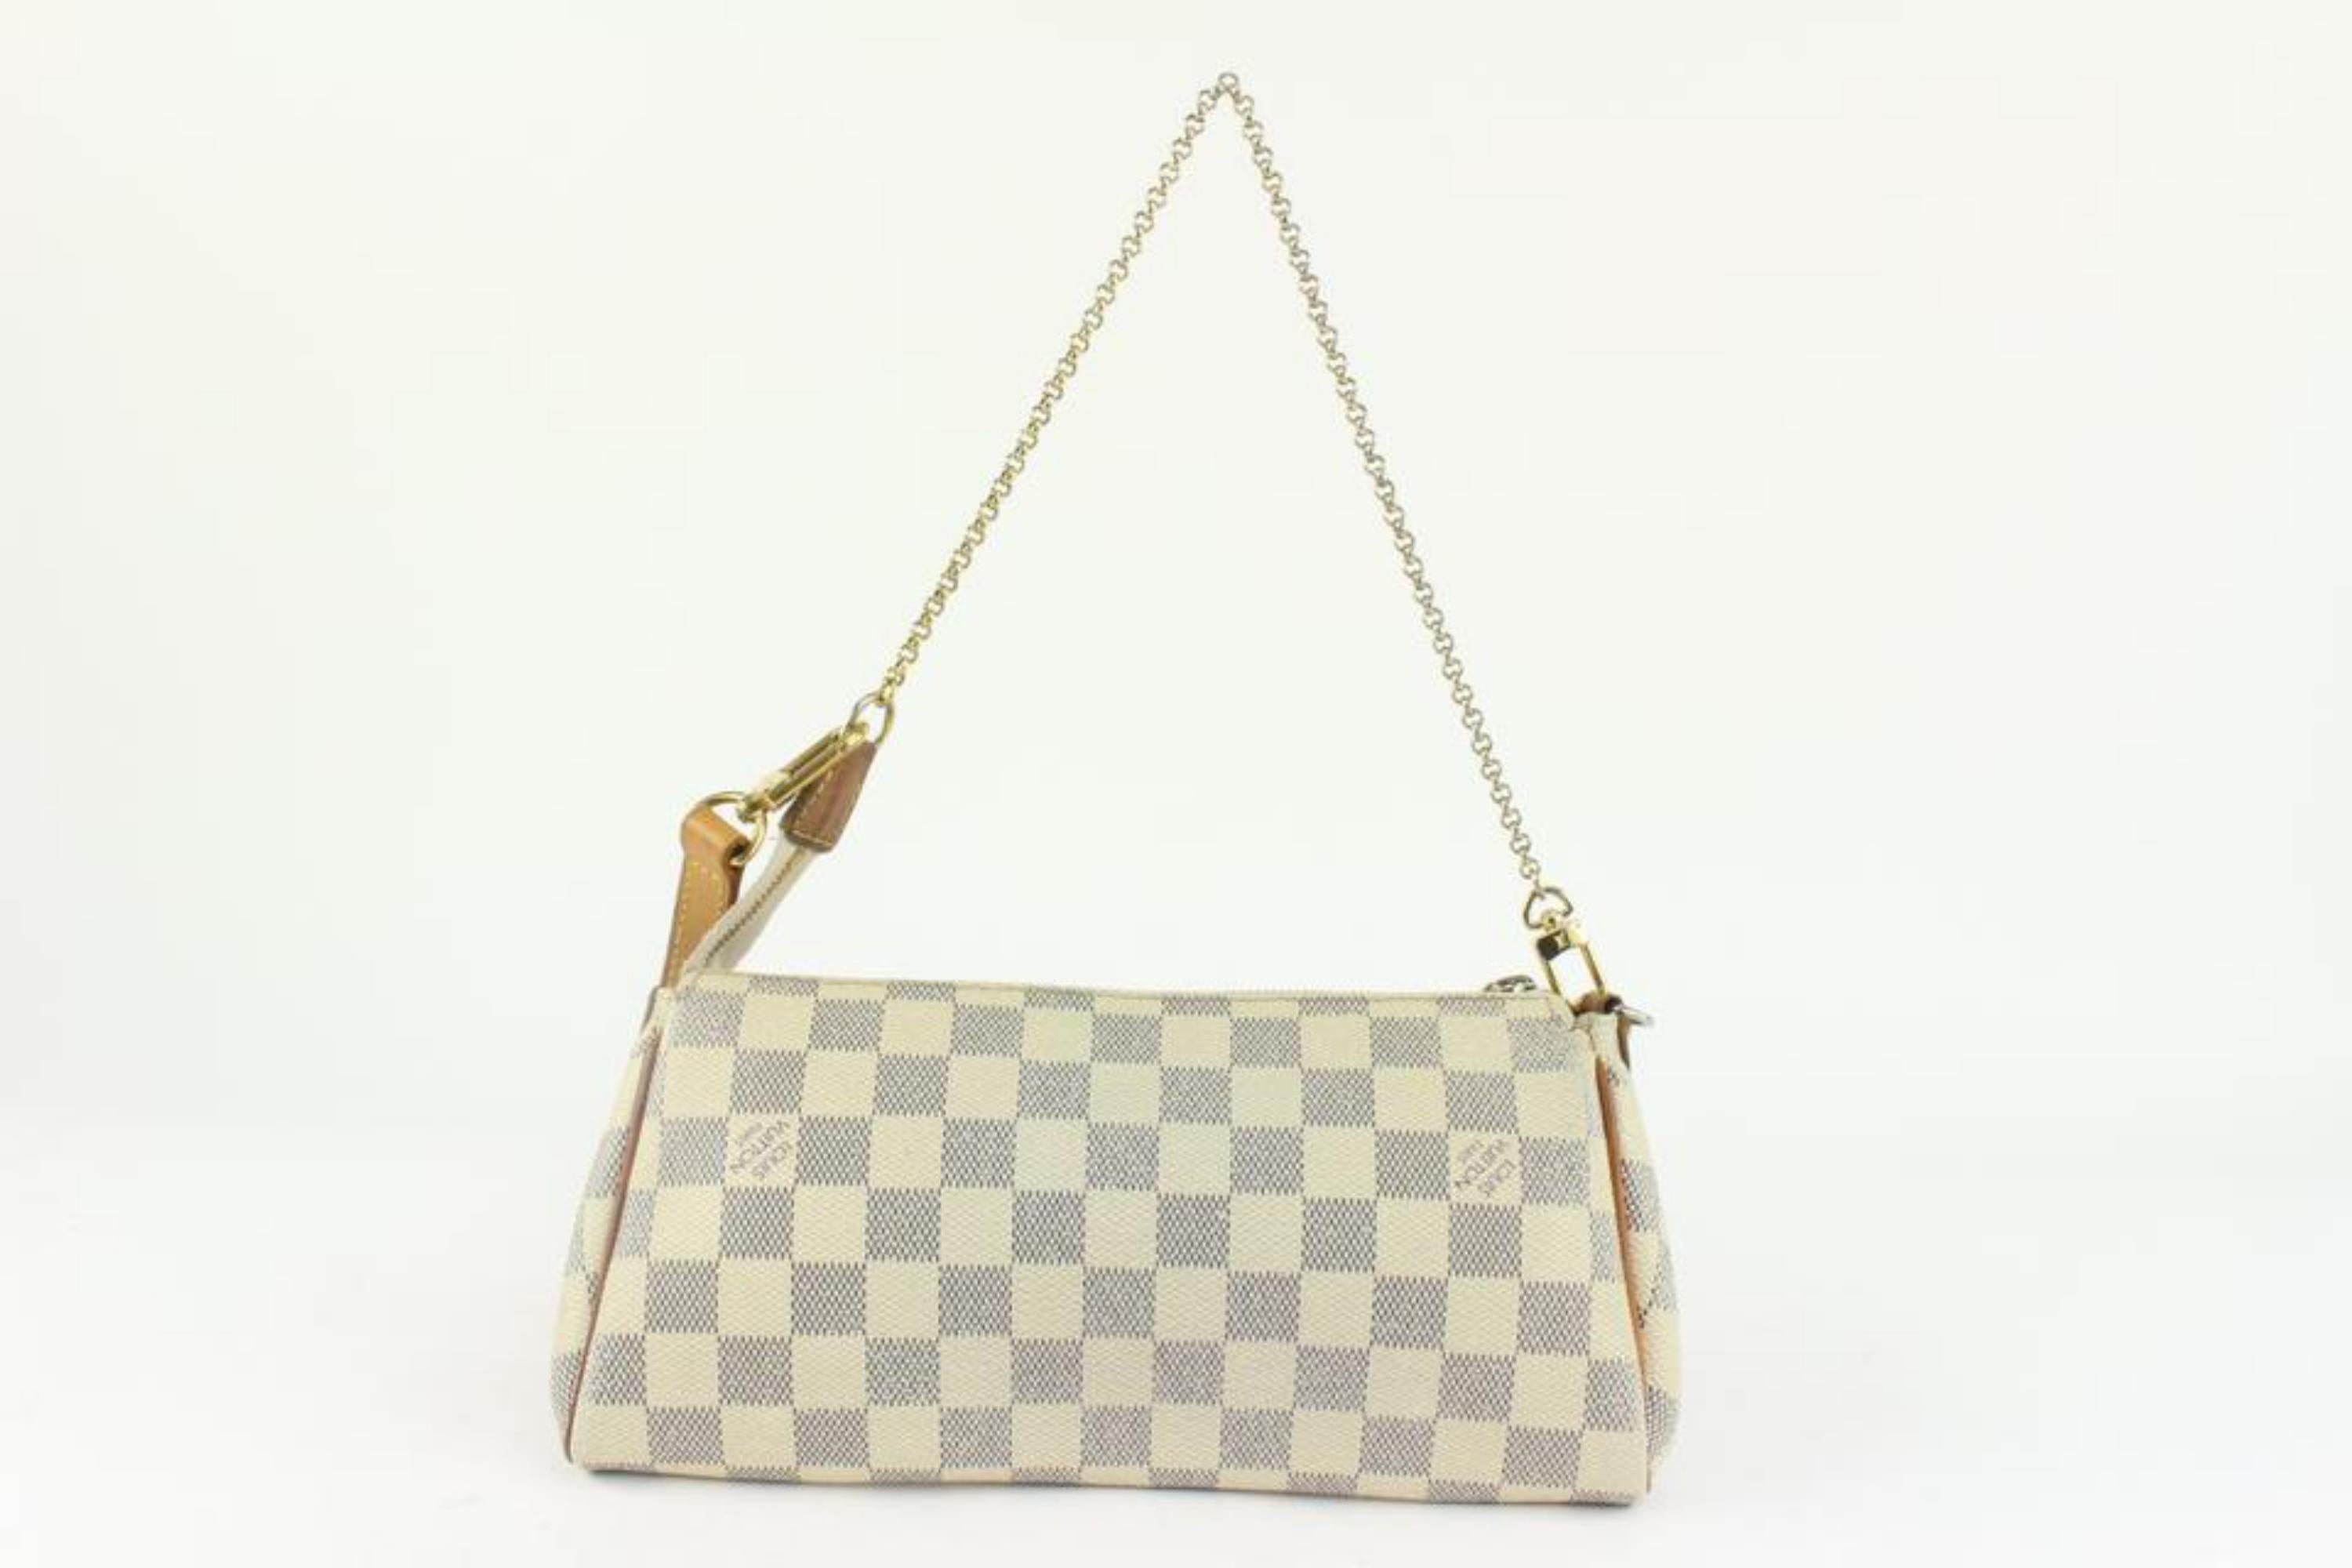 Louis Vuitton Damier Azur Pochette Sophie 2way Eva Crossbody bag 1115lv23 In Good Condition For Sale In Dix hills, NY